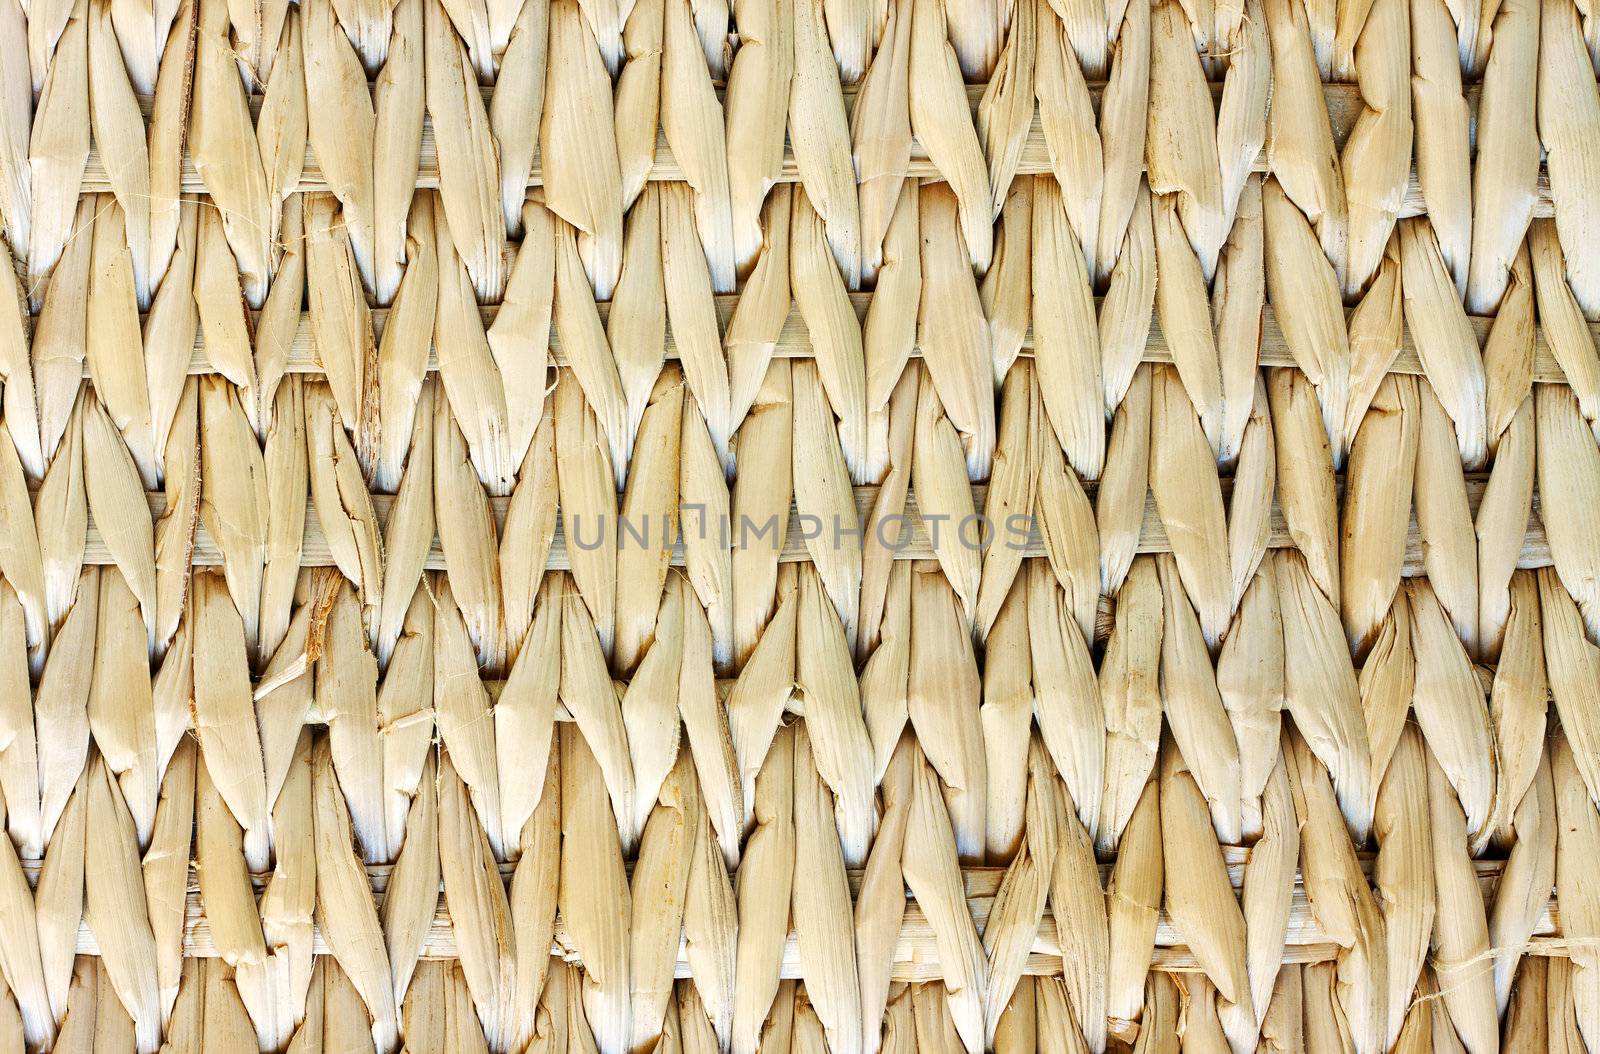 A light cane basket texture or background